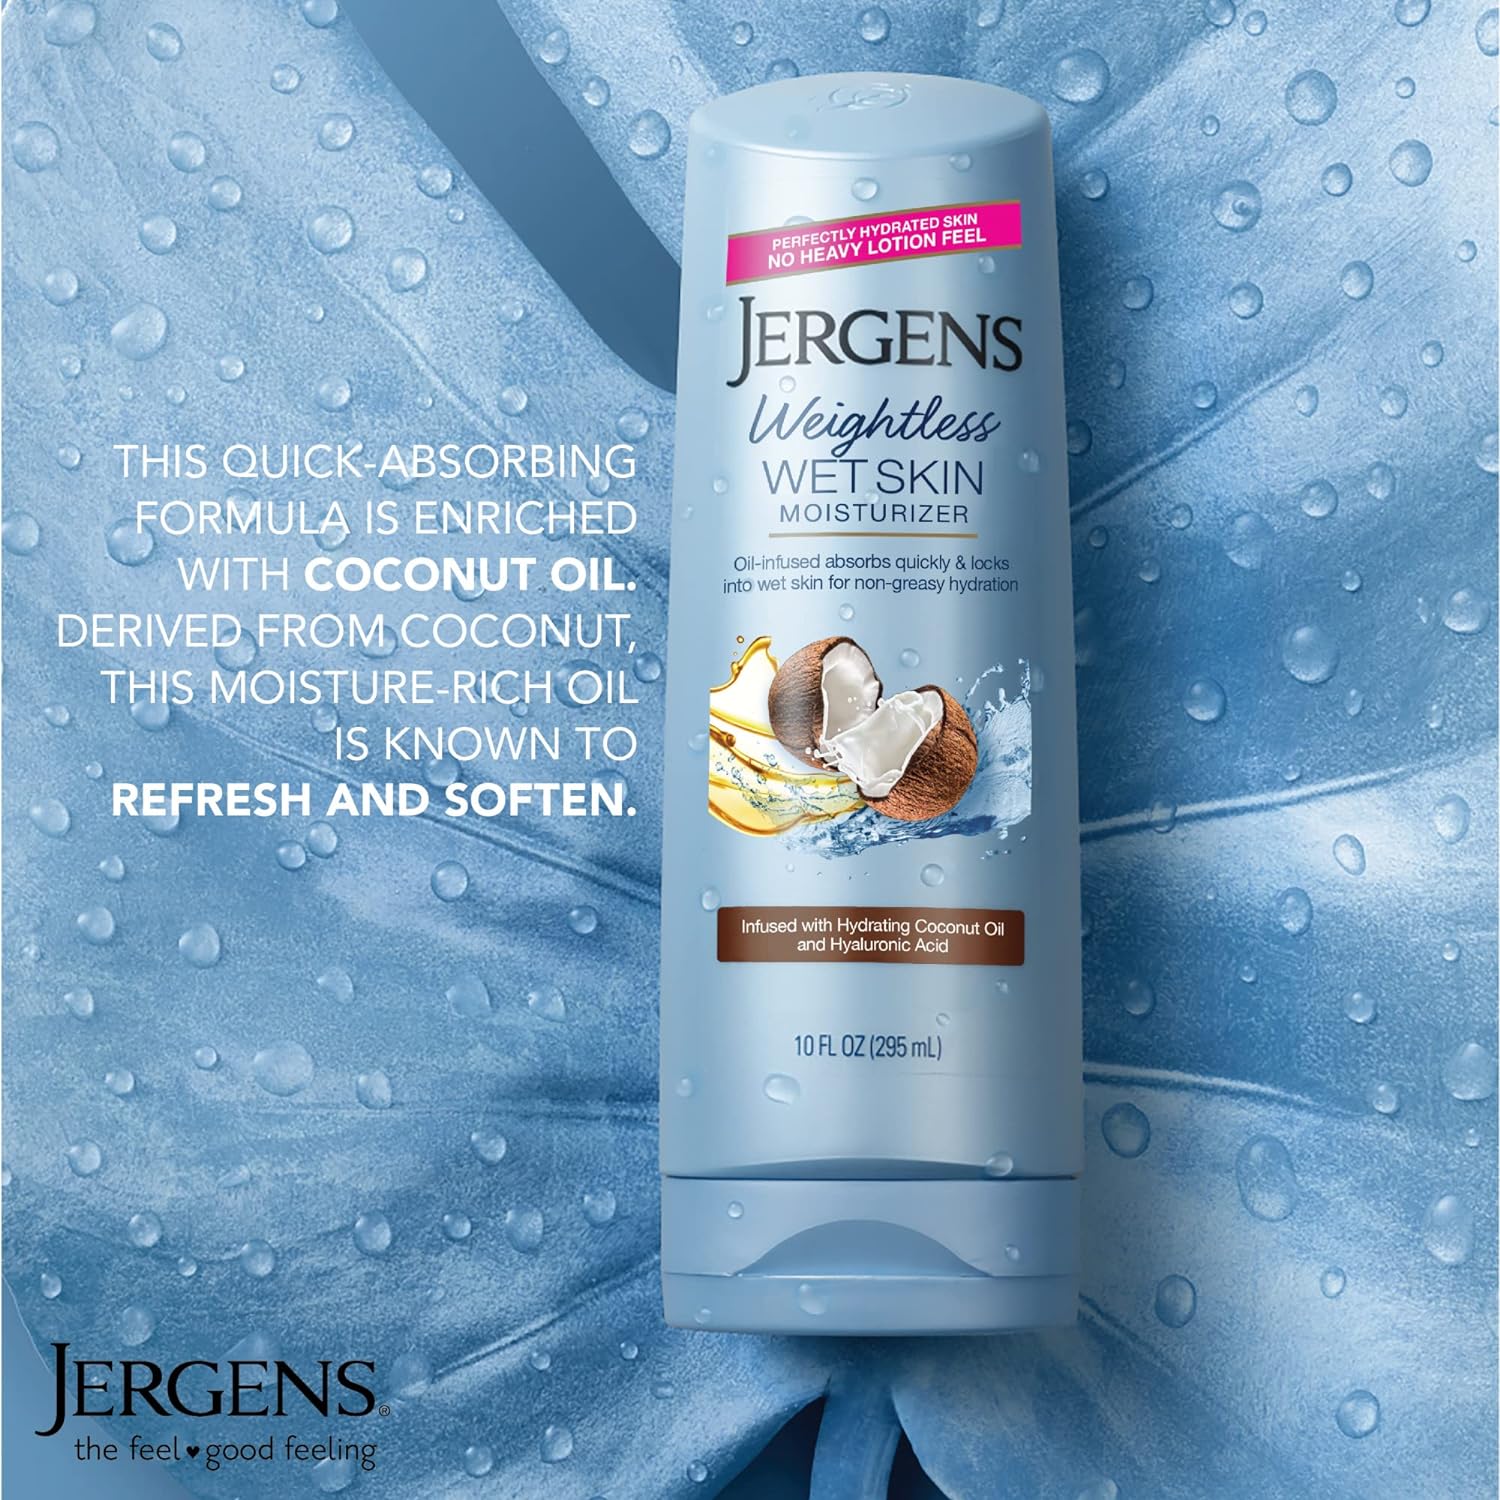 Jergens Wet Skin Body Moisturizer with Restoring Argan Oil, 10 Ounces, 4X Healthier Looking Skin, Fast-Absorbing, Non-Greasy, Dermatologist Tested (Pack of 4) : Beauty & Personal Care